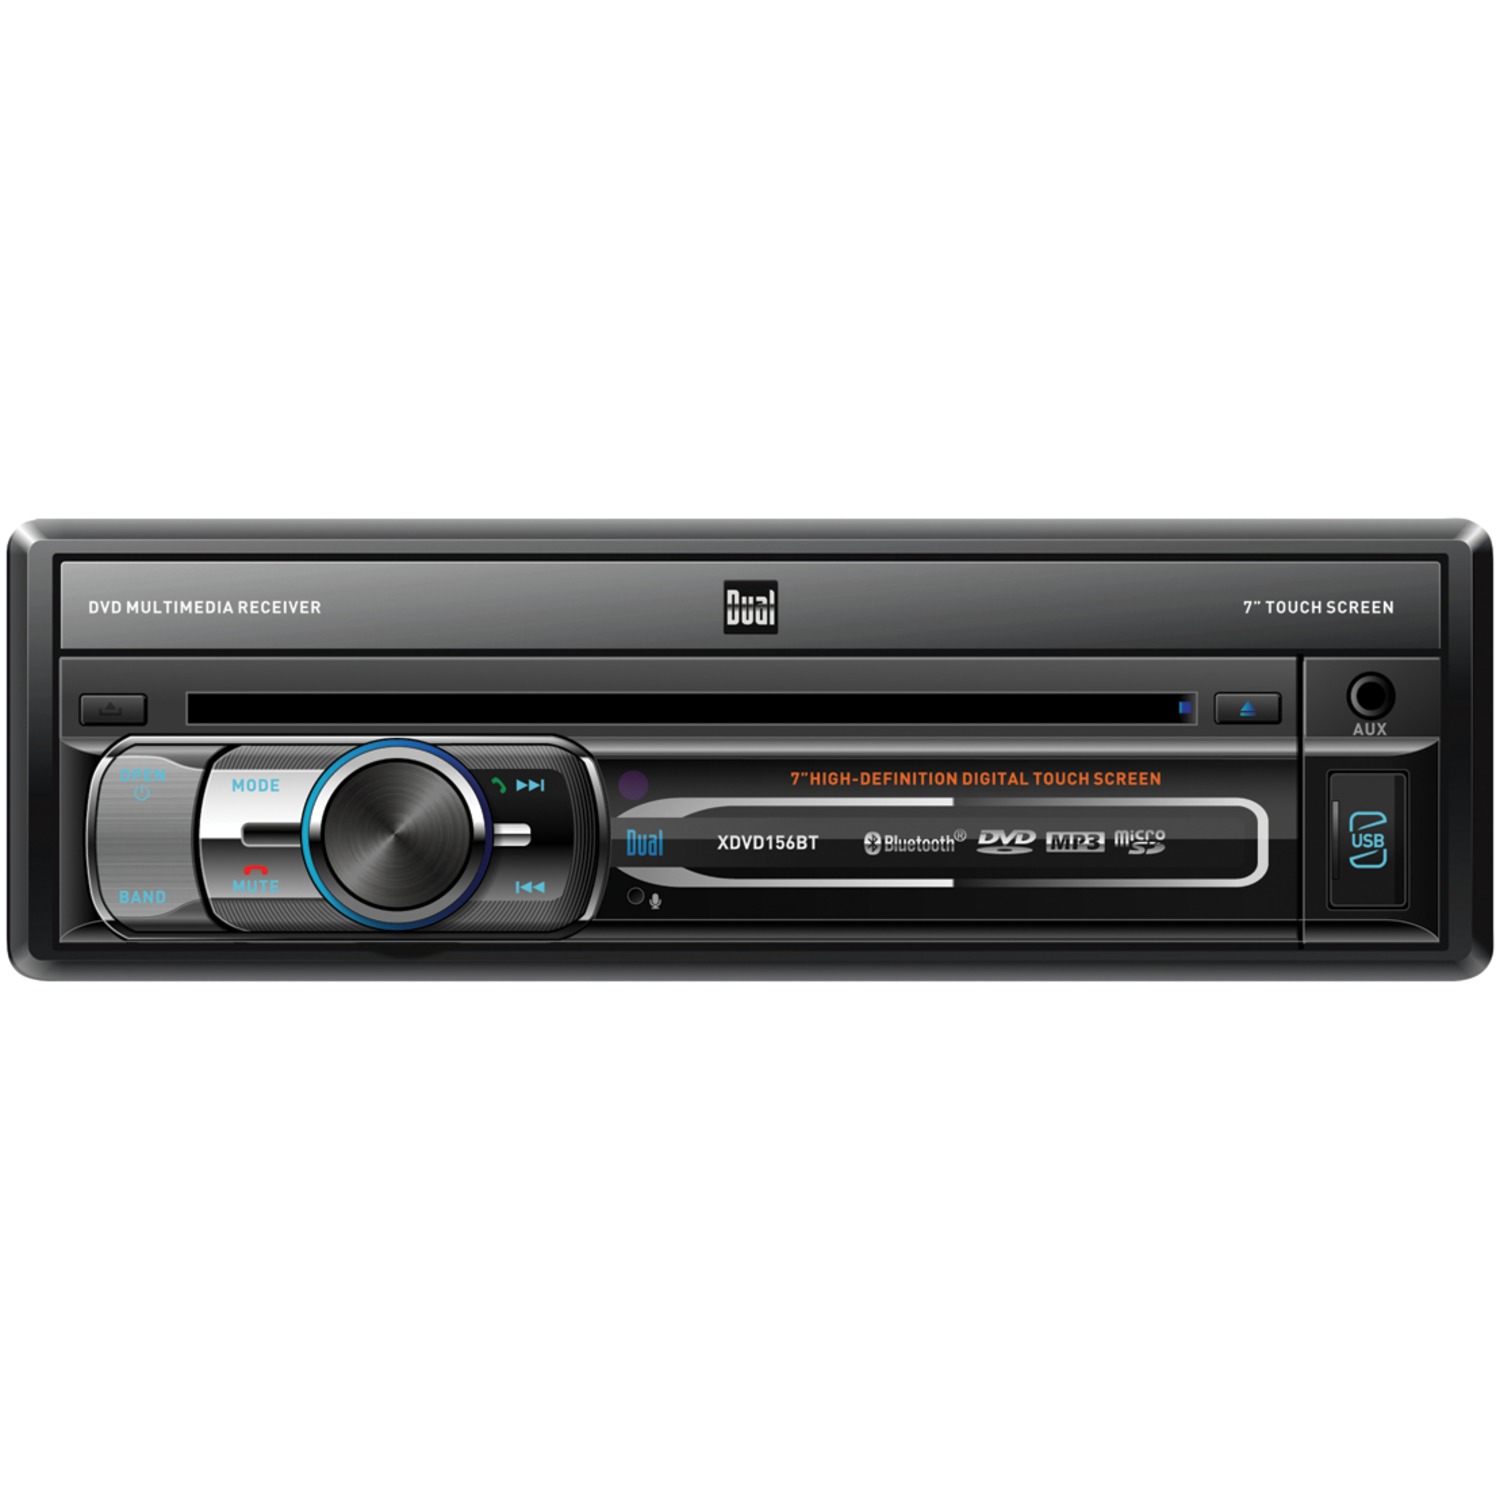 Dual XDVD156BT 7" Single-Din DVD Receiver with Motorized Touchscreen, New - image 2 of 4